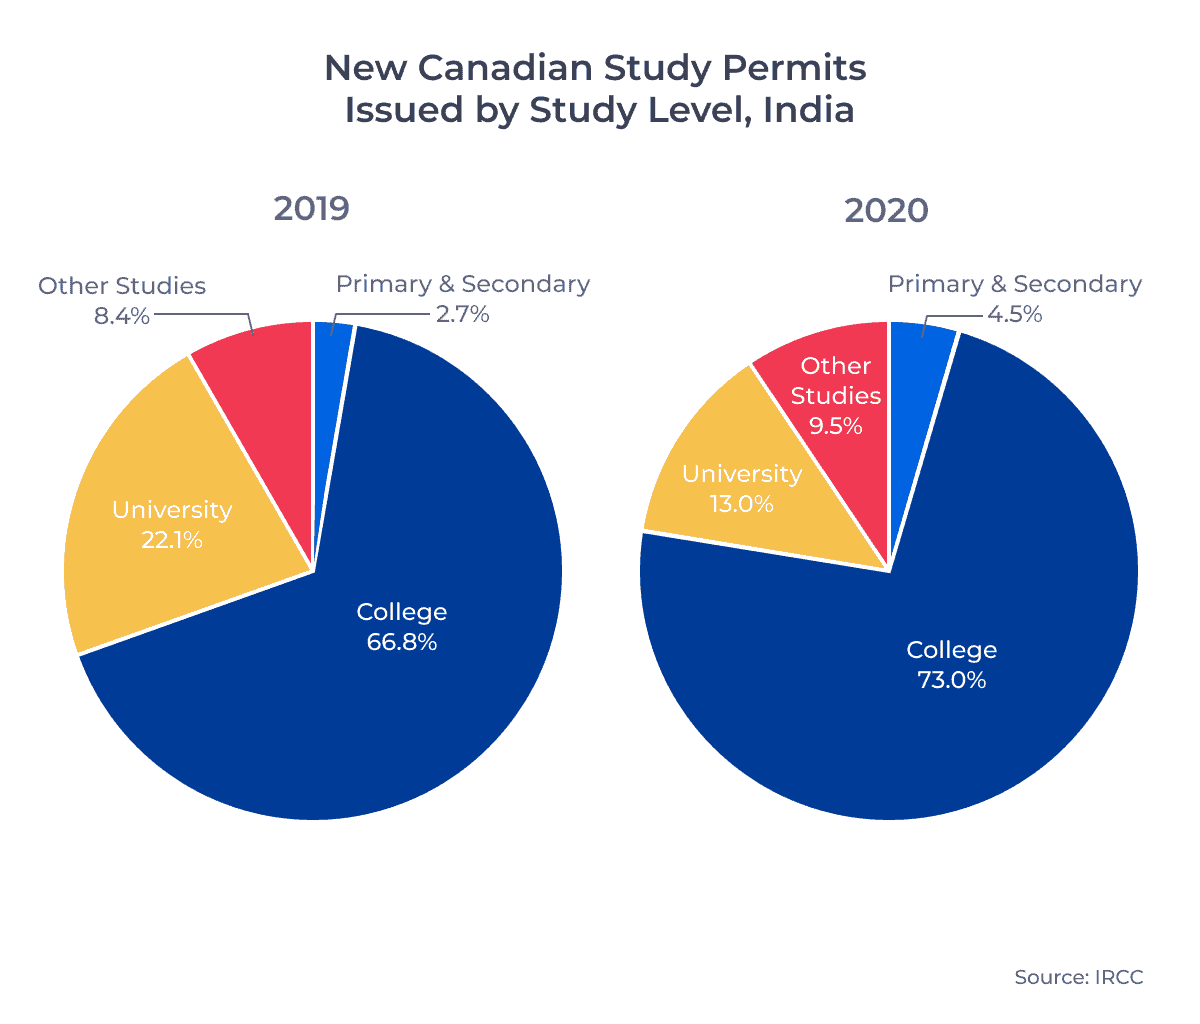 Two circle charts showing the distribution of new Canadian study permits issued to Indian nationals by study level in 2019 and 2020.